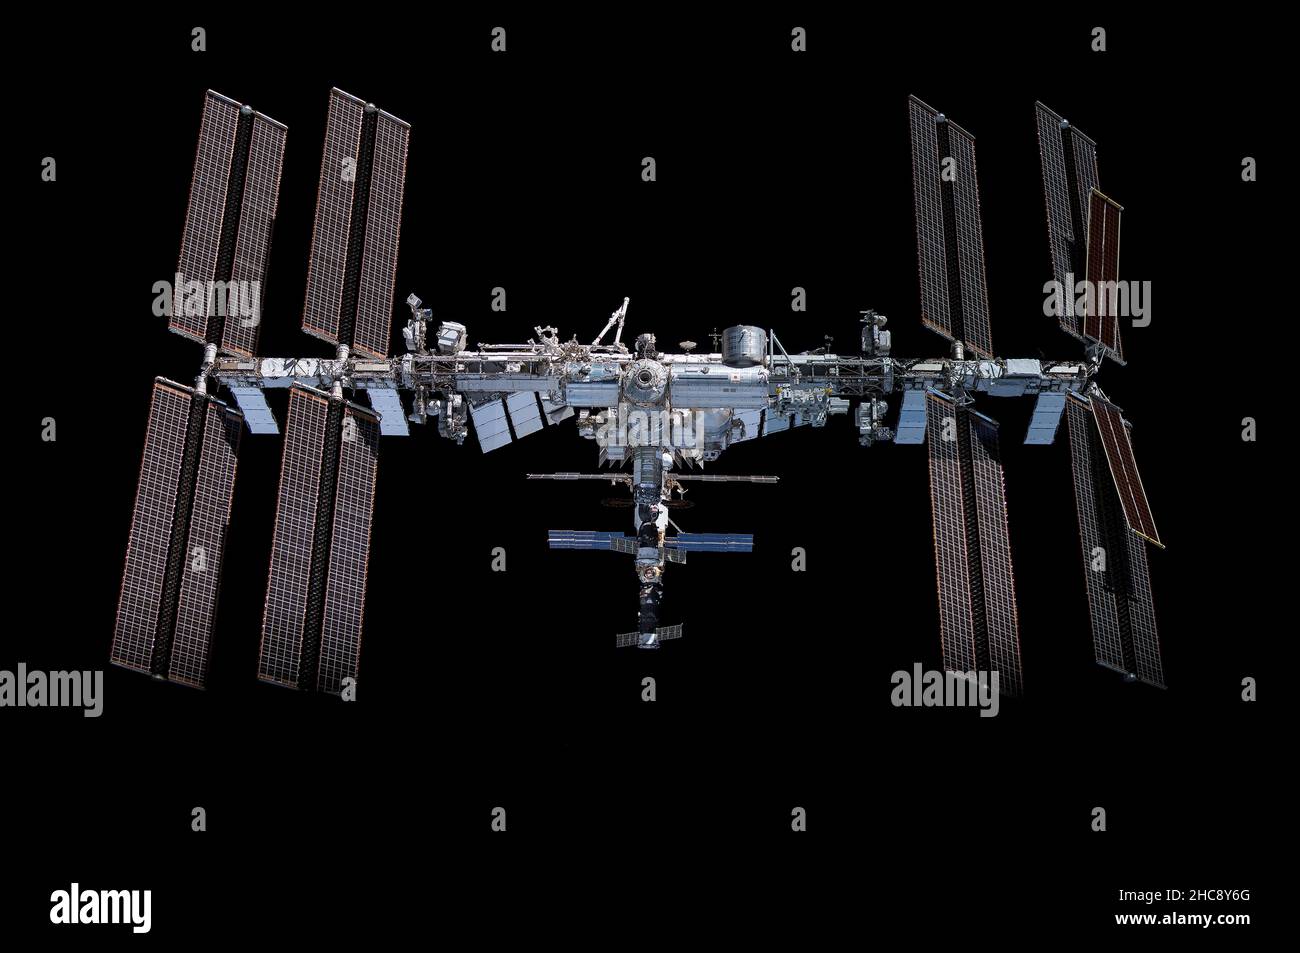 International Space Station, Earth Orbit. 05 December, 2021. The International Space Station seen from the SpaceX Crew Dragon Endeavour spacecraft during a fly-around of the orbiting lab after undocking from the Harmony module space-facing port November 8, 2021 in Earth Orbit. Credit: NASA/NASA/Alamy Live News Stock Photo